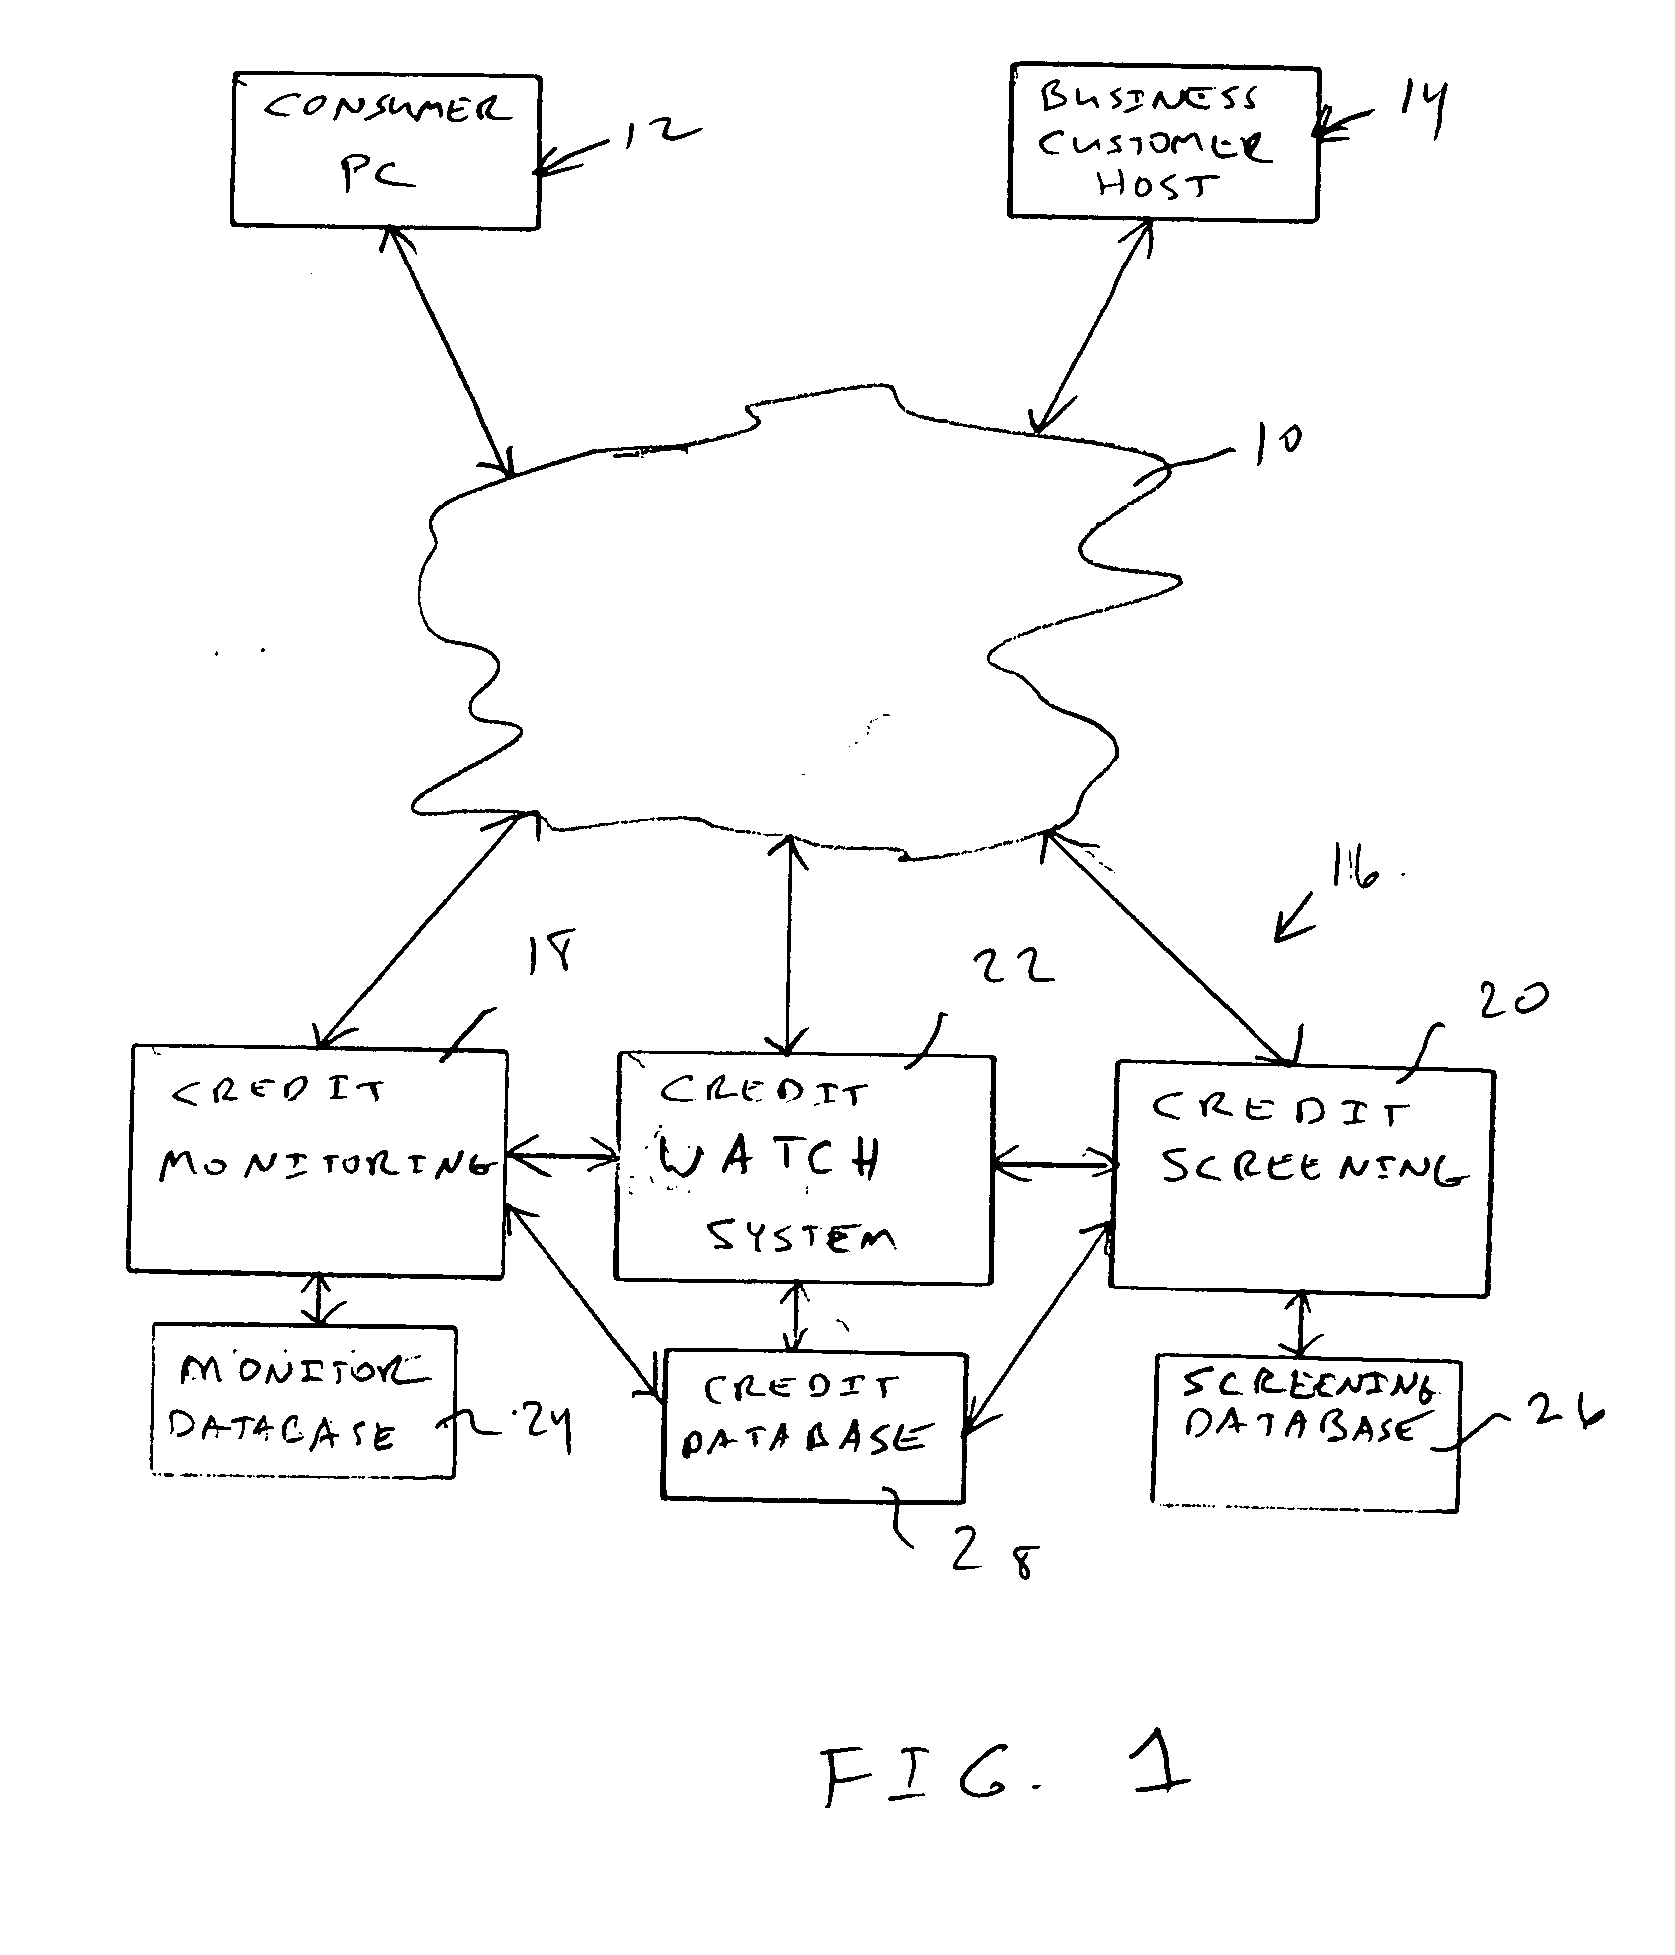 Credit approval monitoring system and method